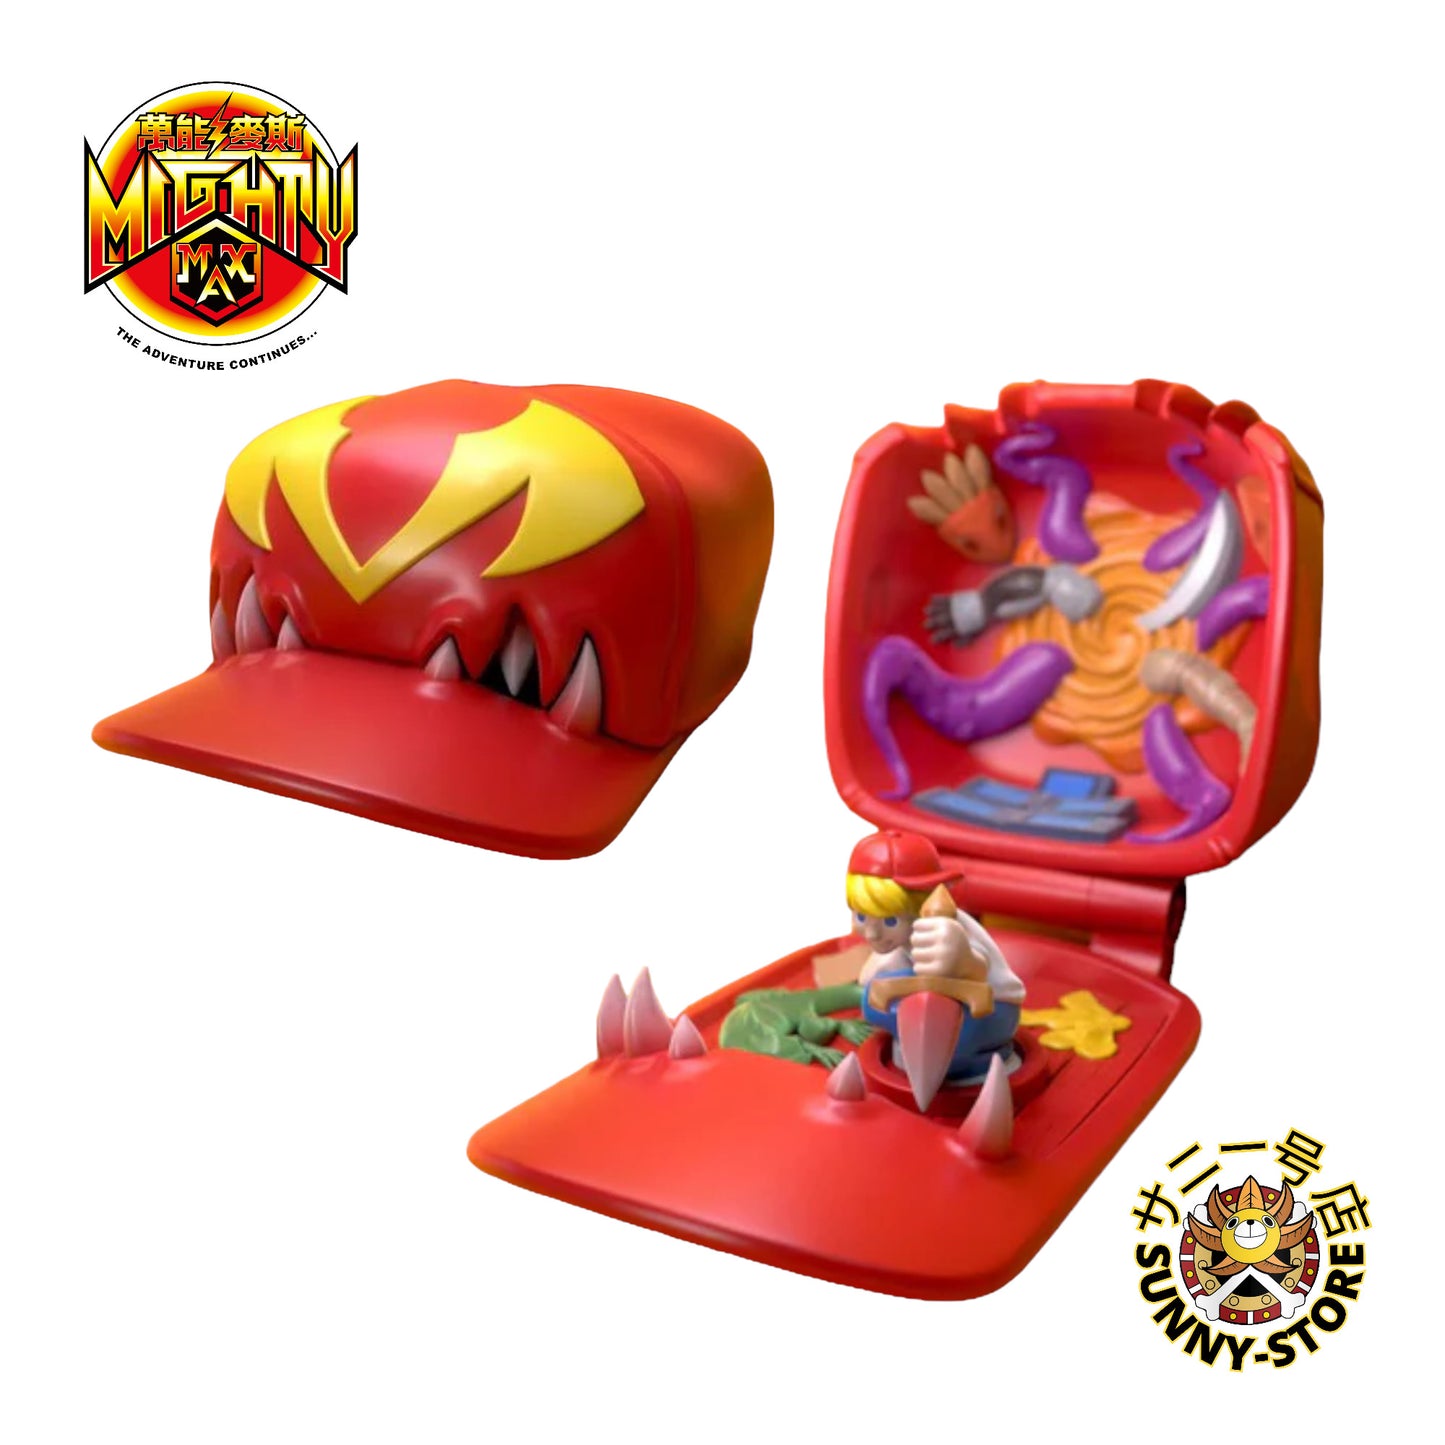 PLAYSET PEARIA - MIGHTY MAX 30TH ANNIVERSARY CROSSES MIGHTY HAT SET - SINGULAR POINT